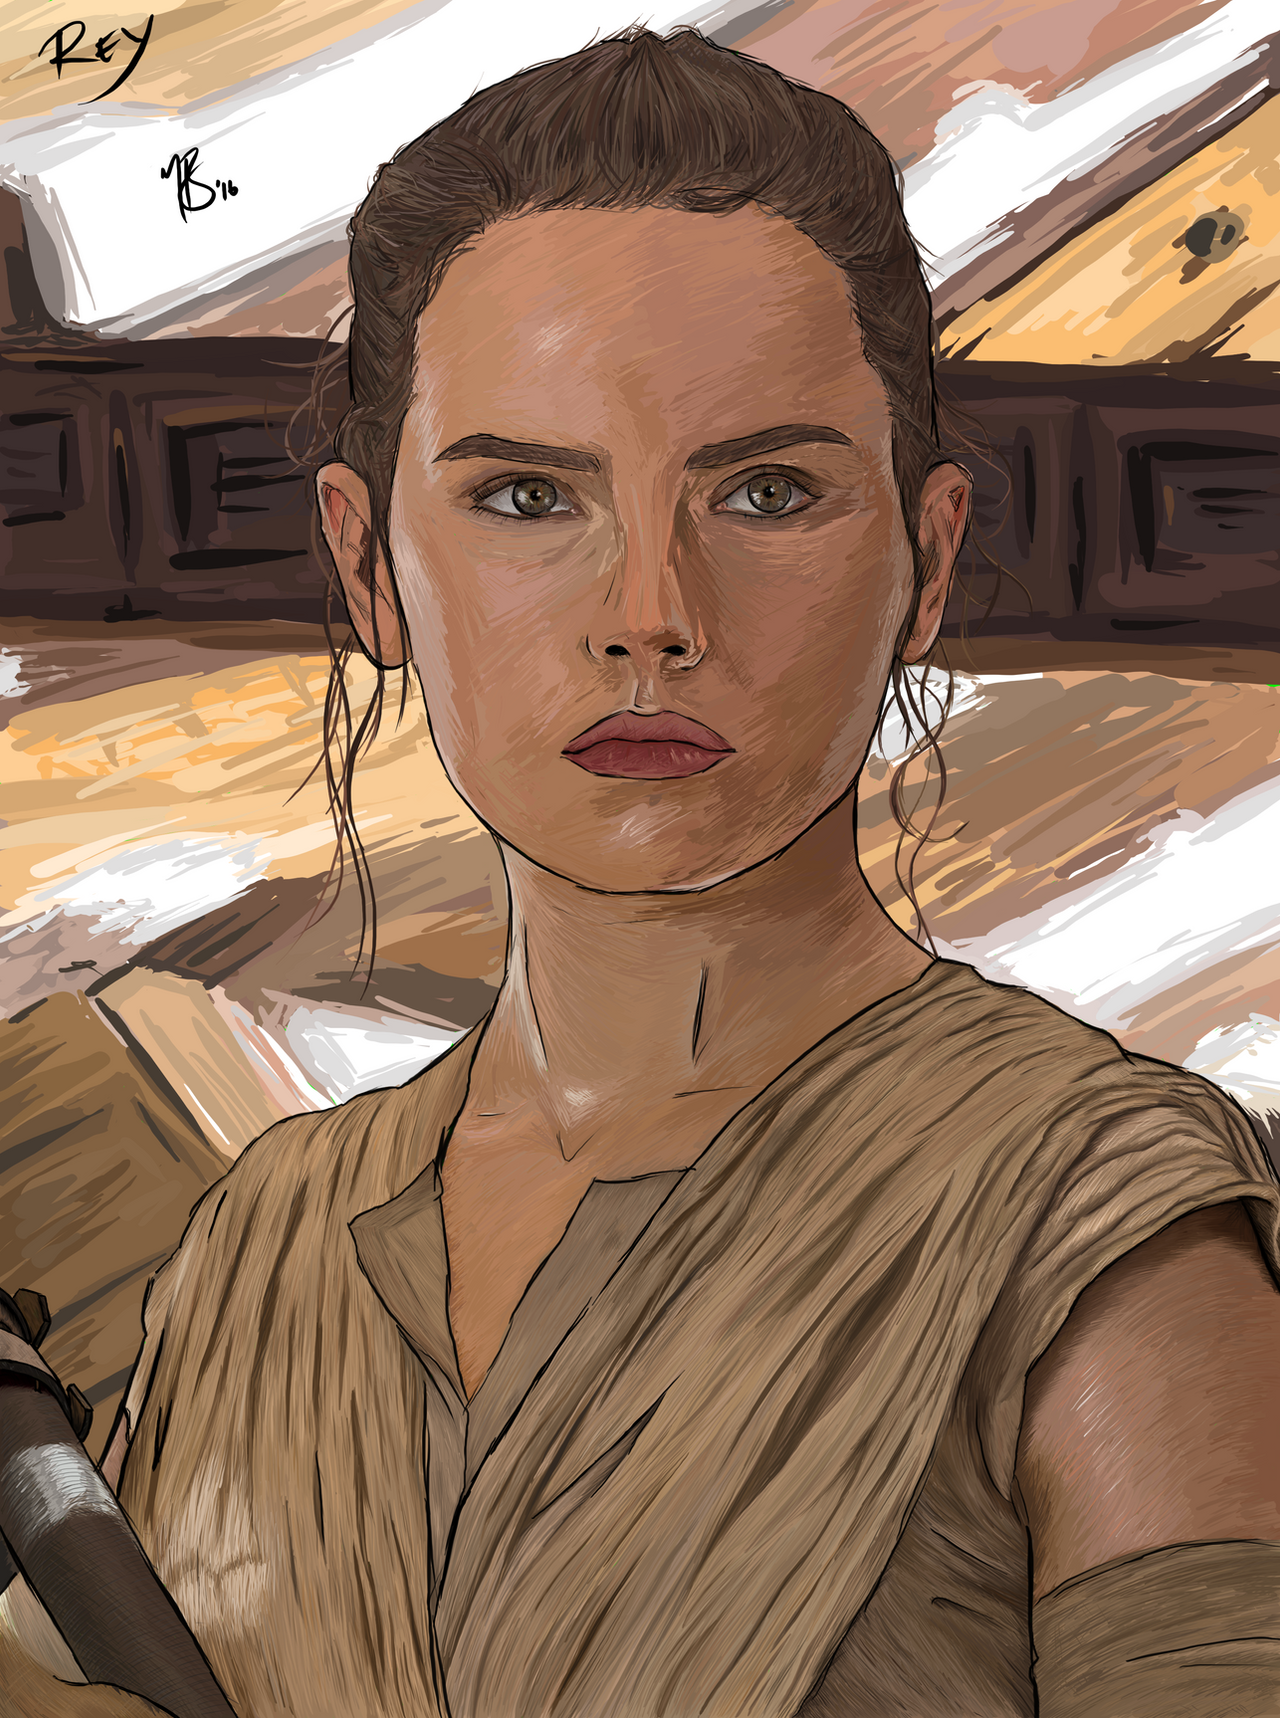 rey___daisy_ridley___star_wars_episode_vii_by_bromtomley-da1domb.png